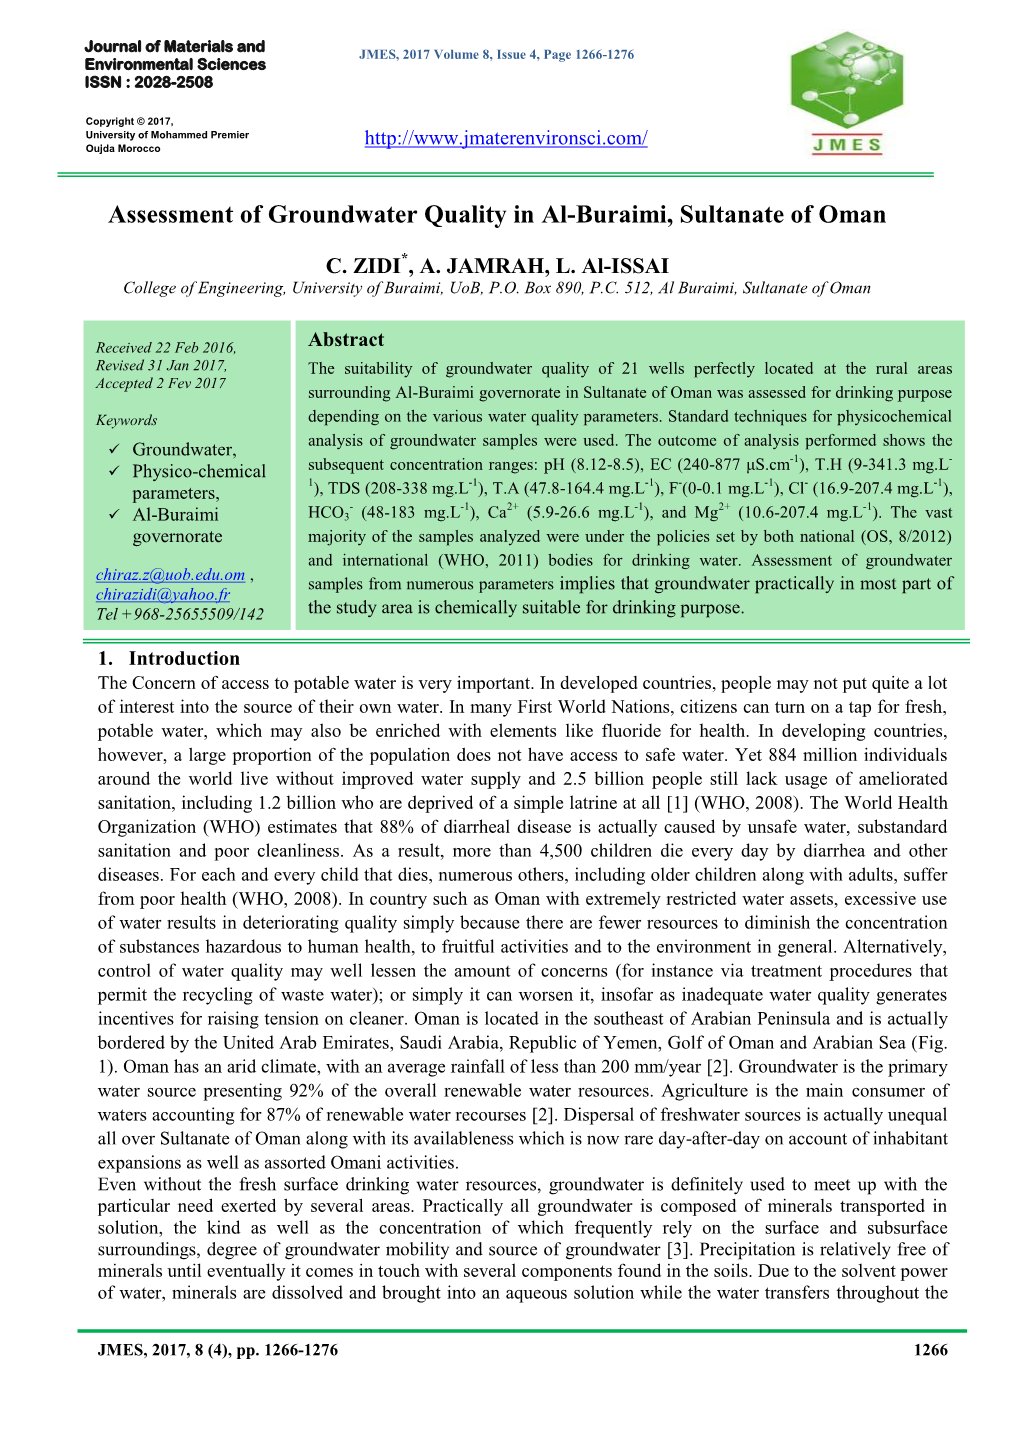 Assessment of Groundwater Quality in Al-Buraimi, Sultanate of Oman, ZIDI C., Jamrah A., Al-Issai